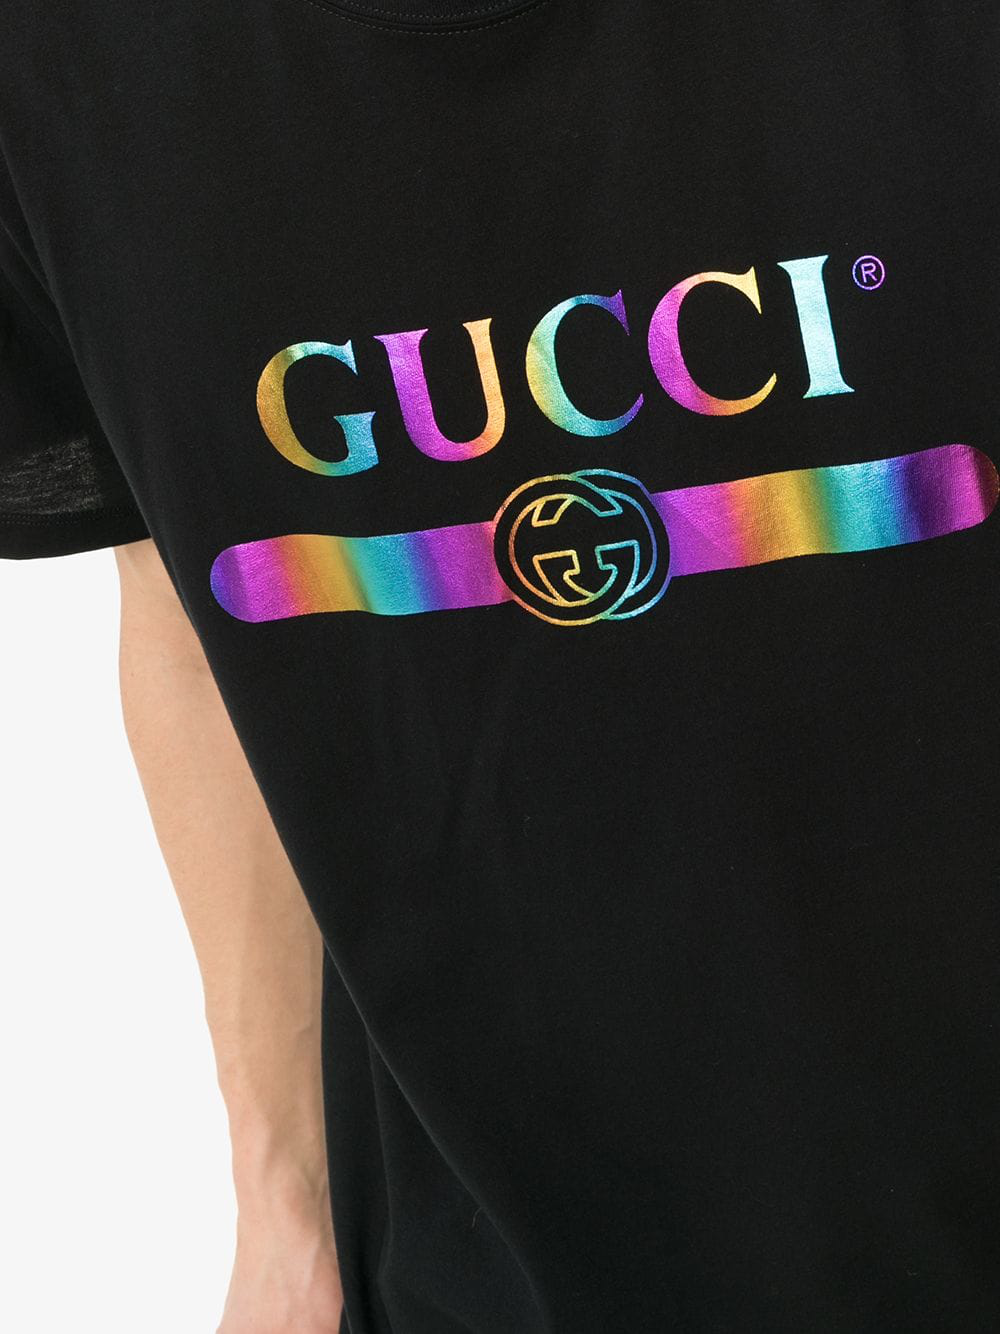 gucci holographic tee, OFF 77%,www 